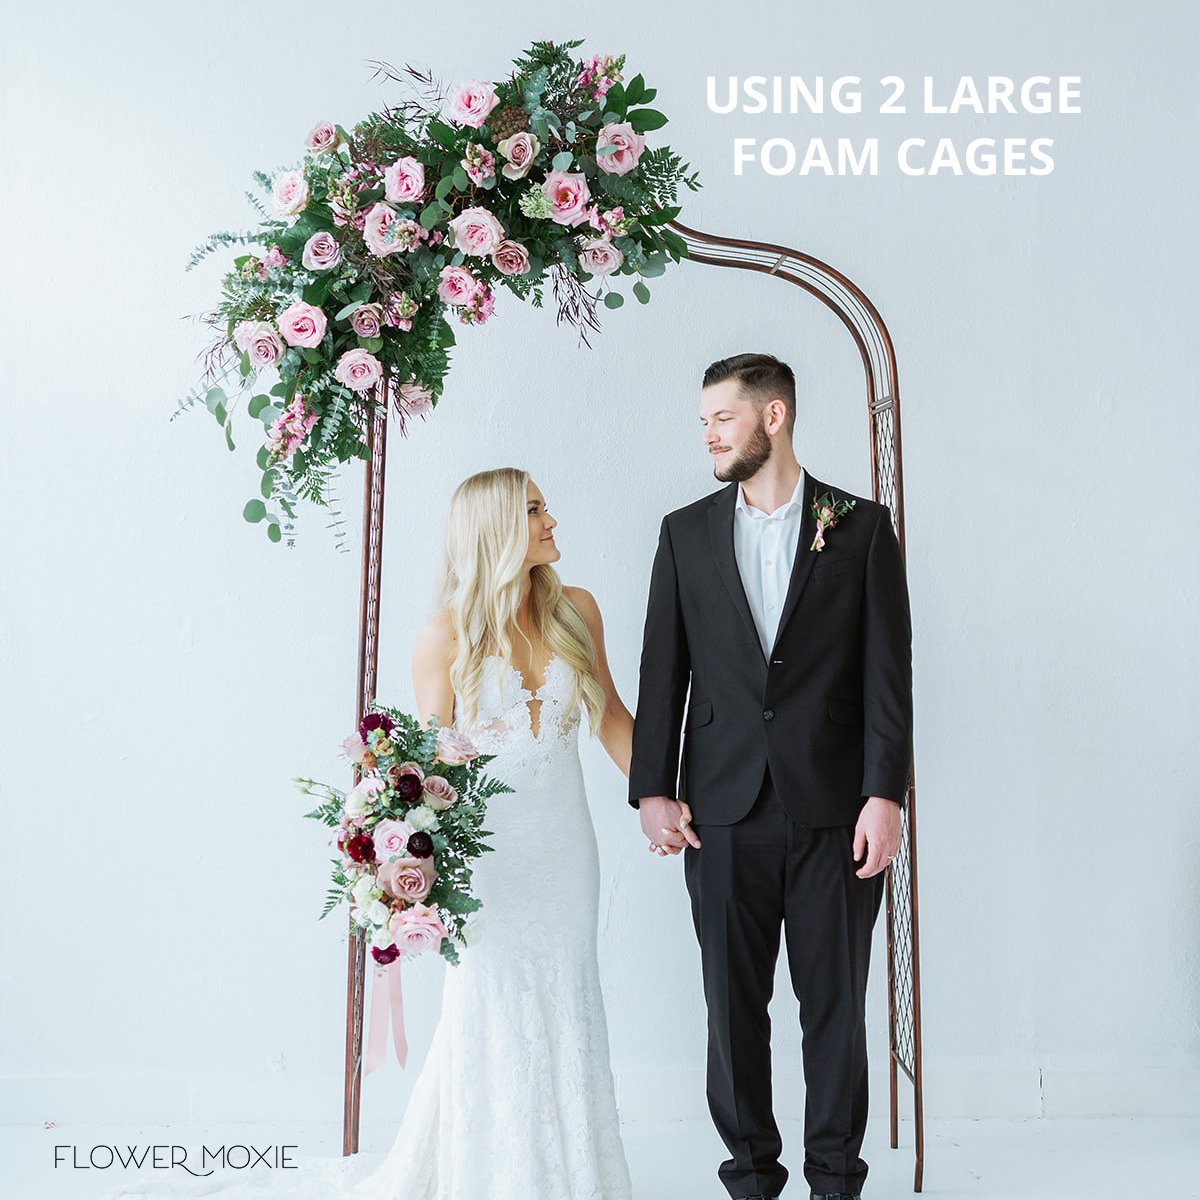 Jumbo Wet Floral Foam Cages for Arches, Flower Moxie